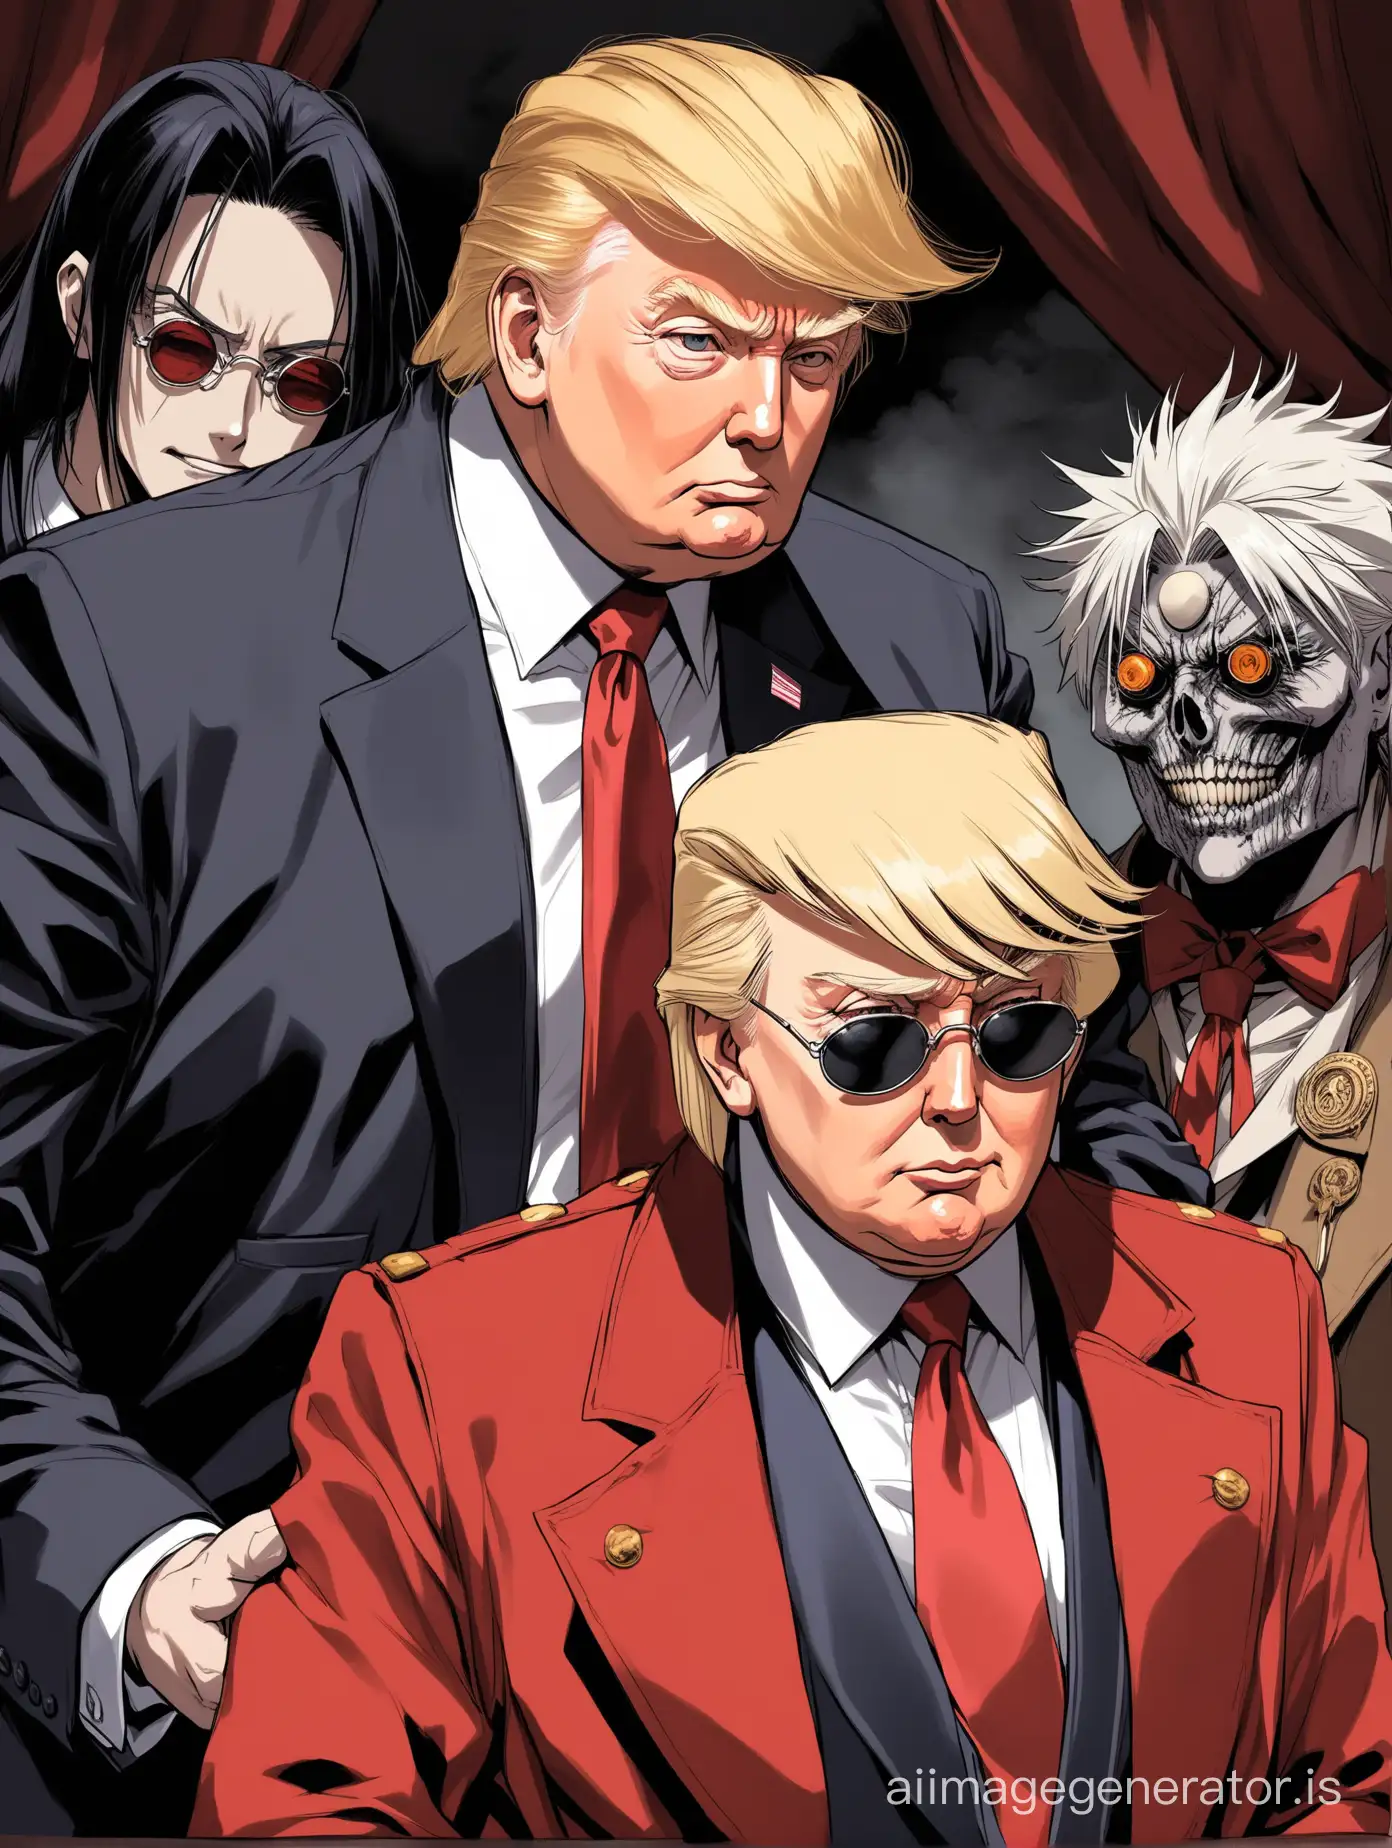 Donald Trump with Alexander Anderson from Hellsing